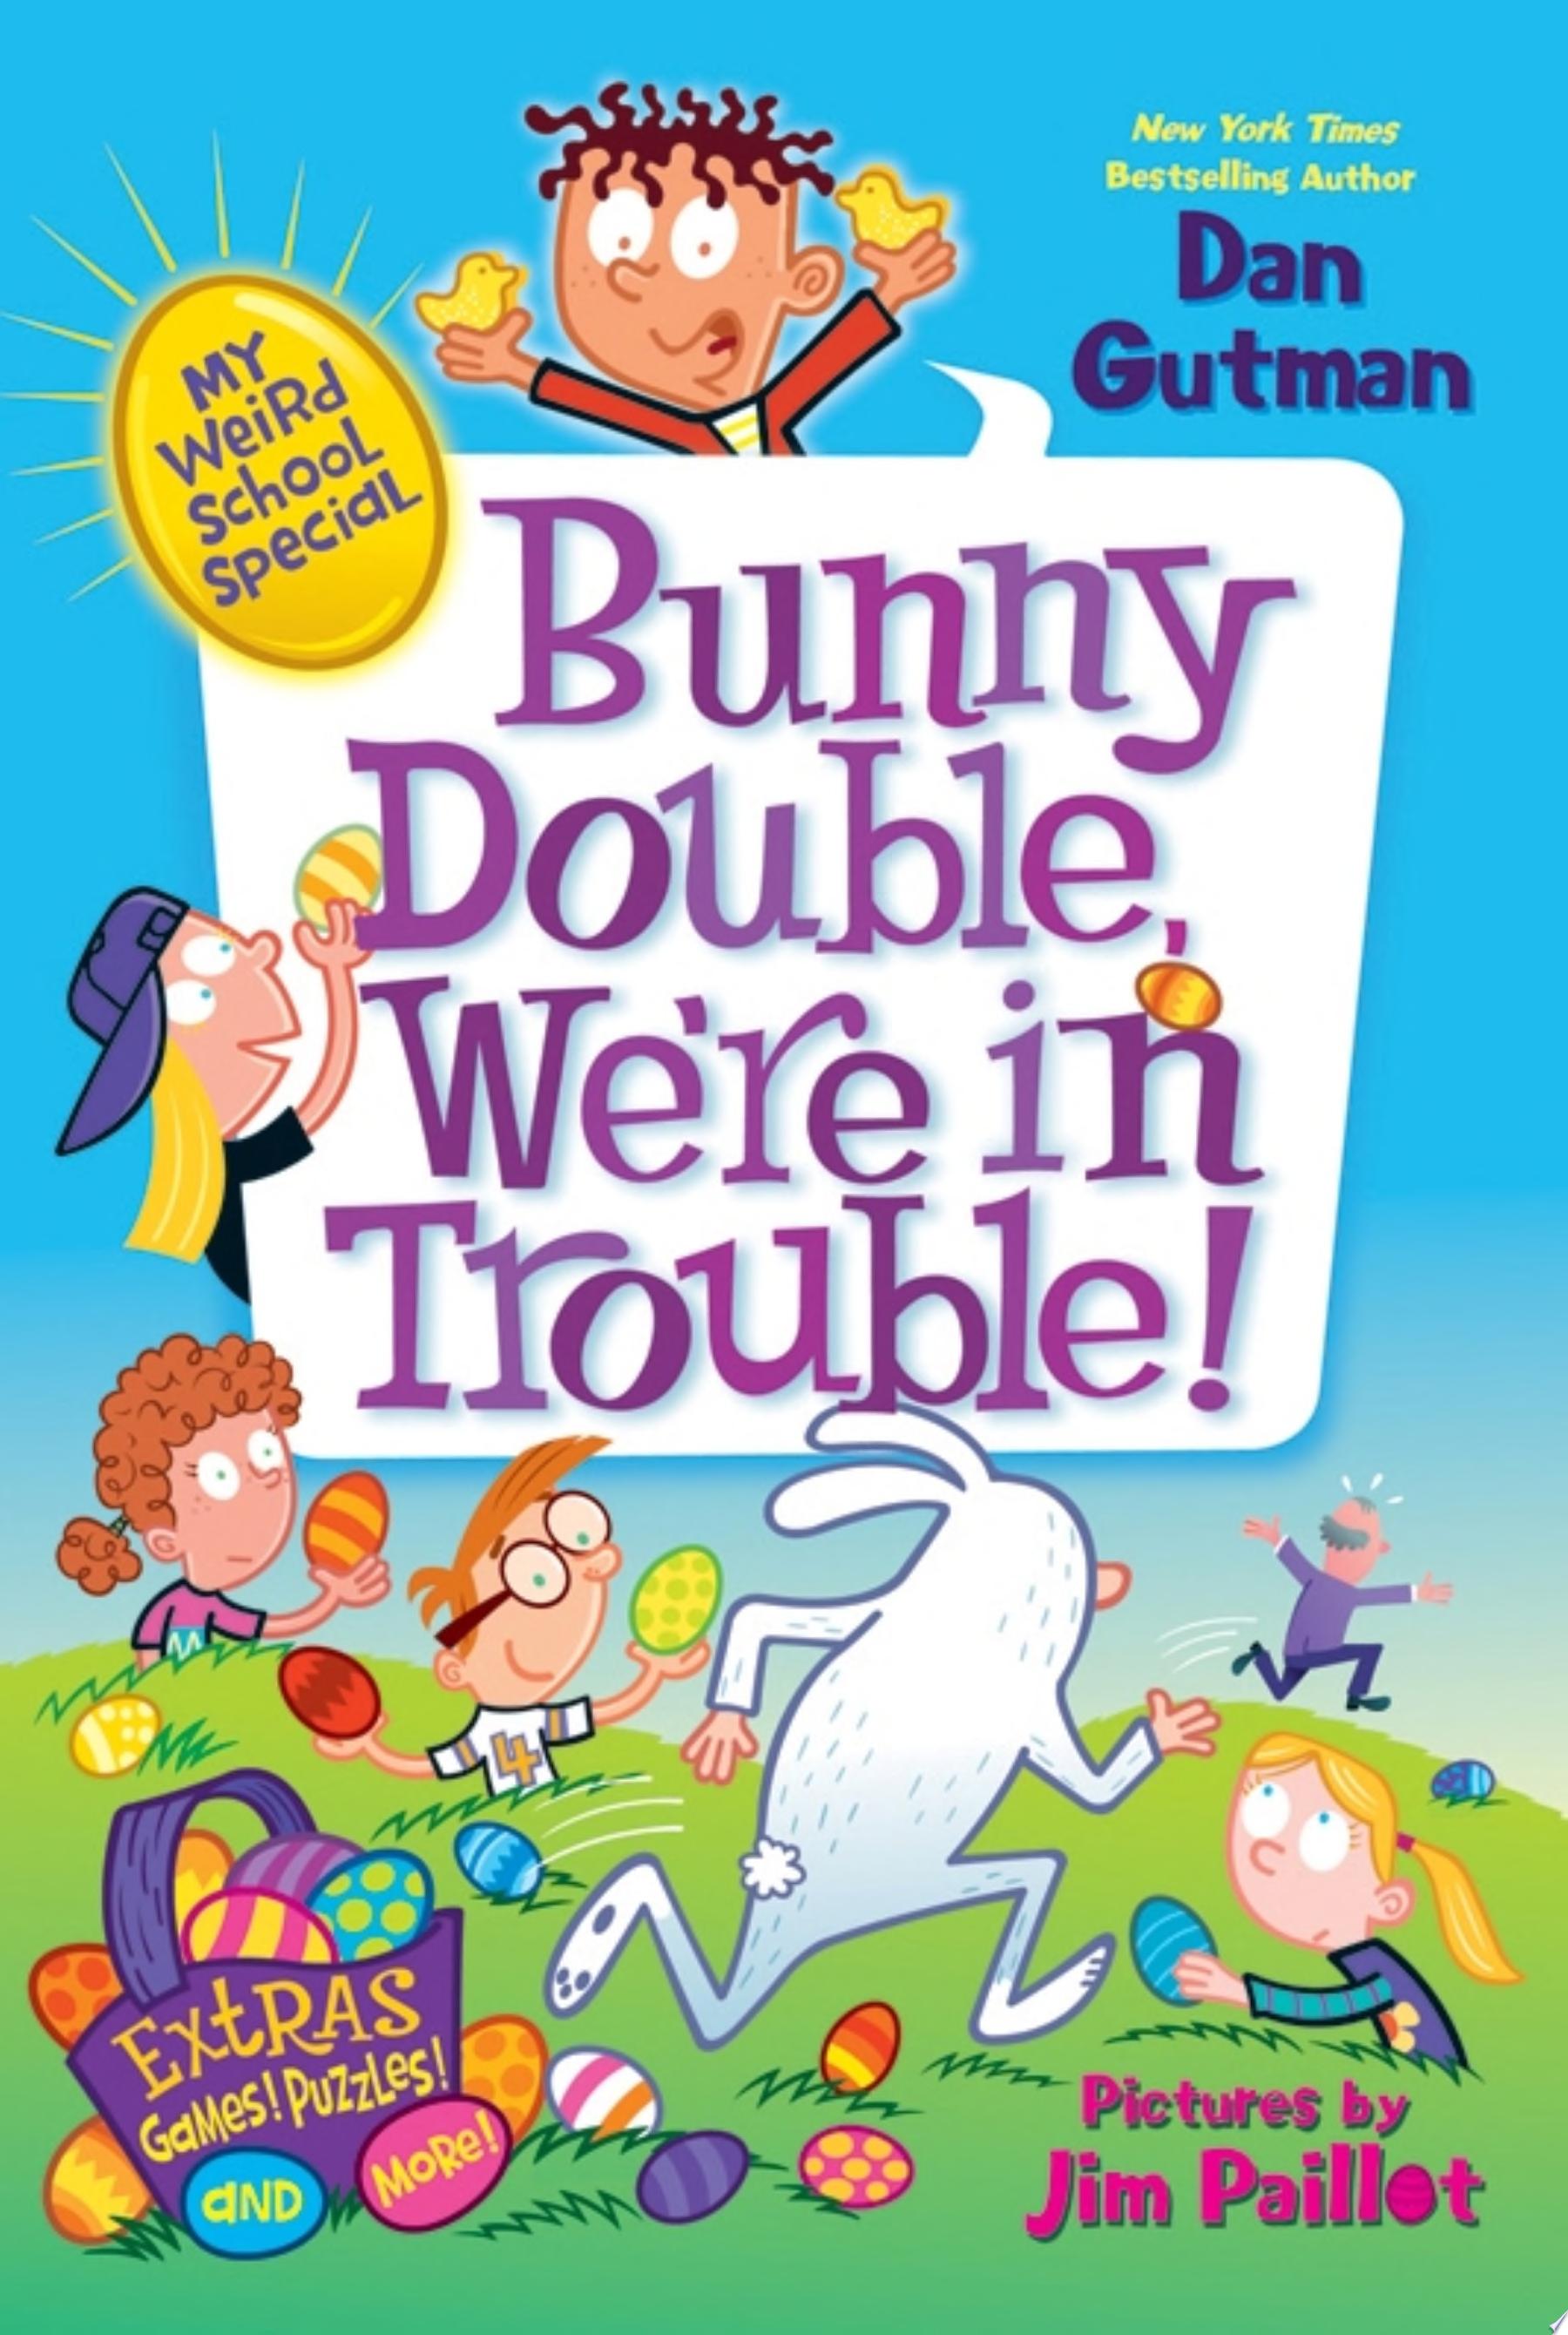 Image for "My Weird School Special: Bunny Double, We&#039;re in Trouble!"